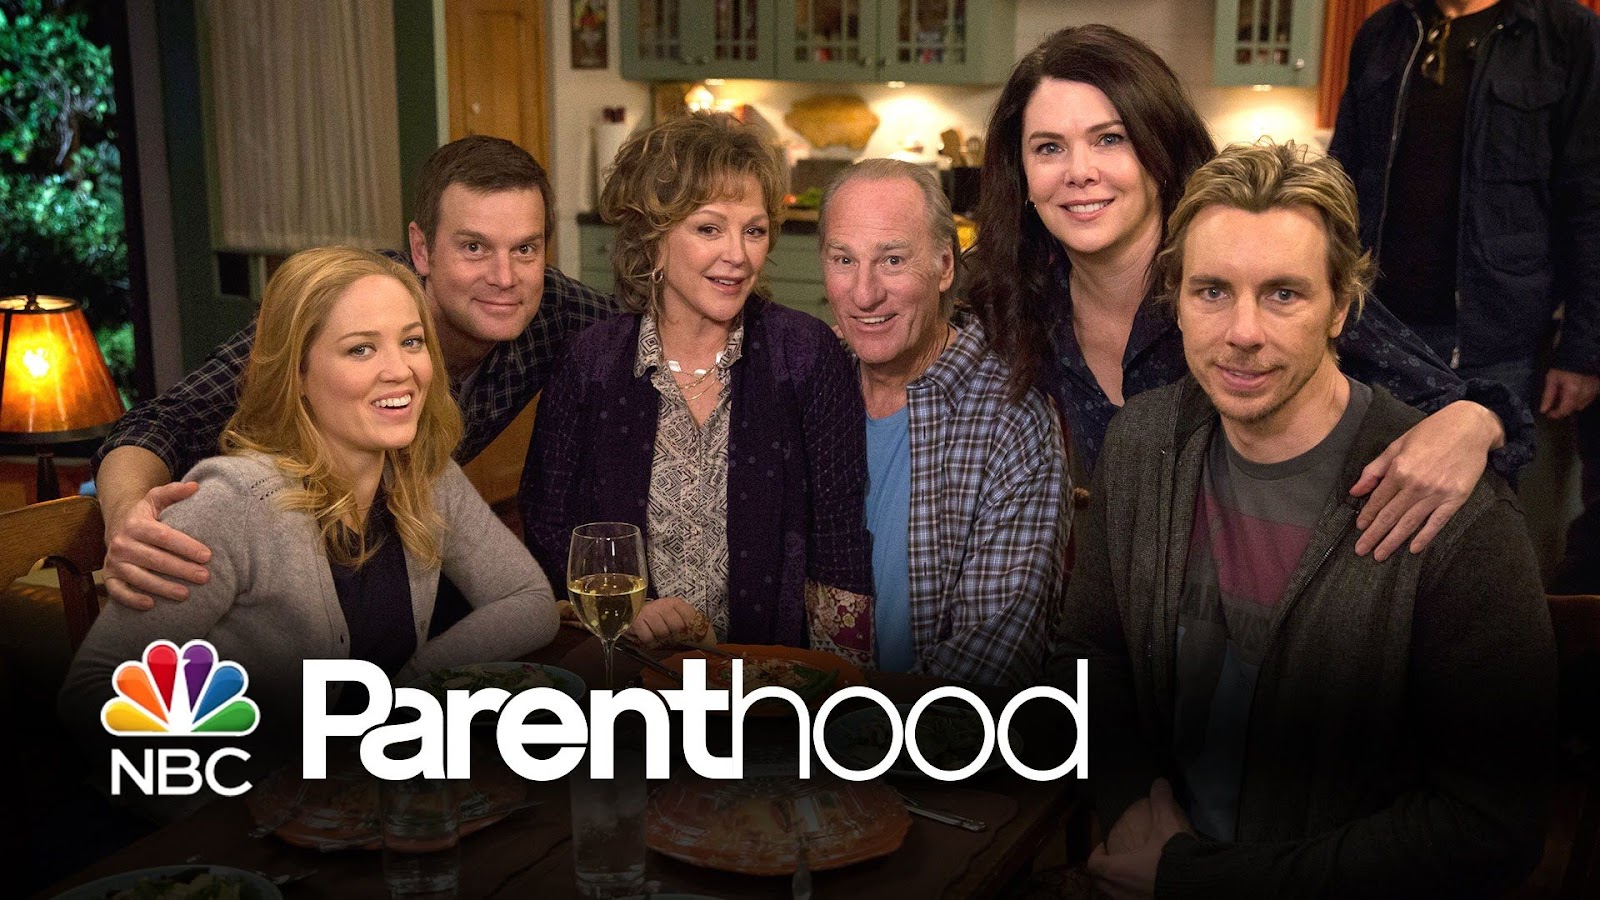 “Parenthood” Cast: Where Are They Now?